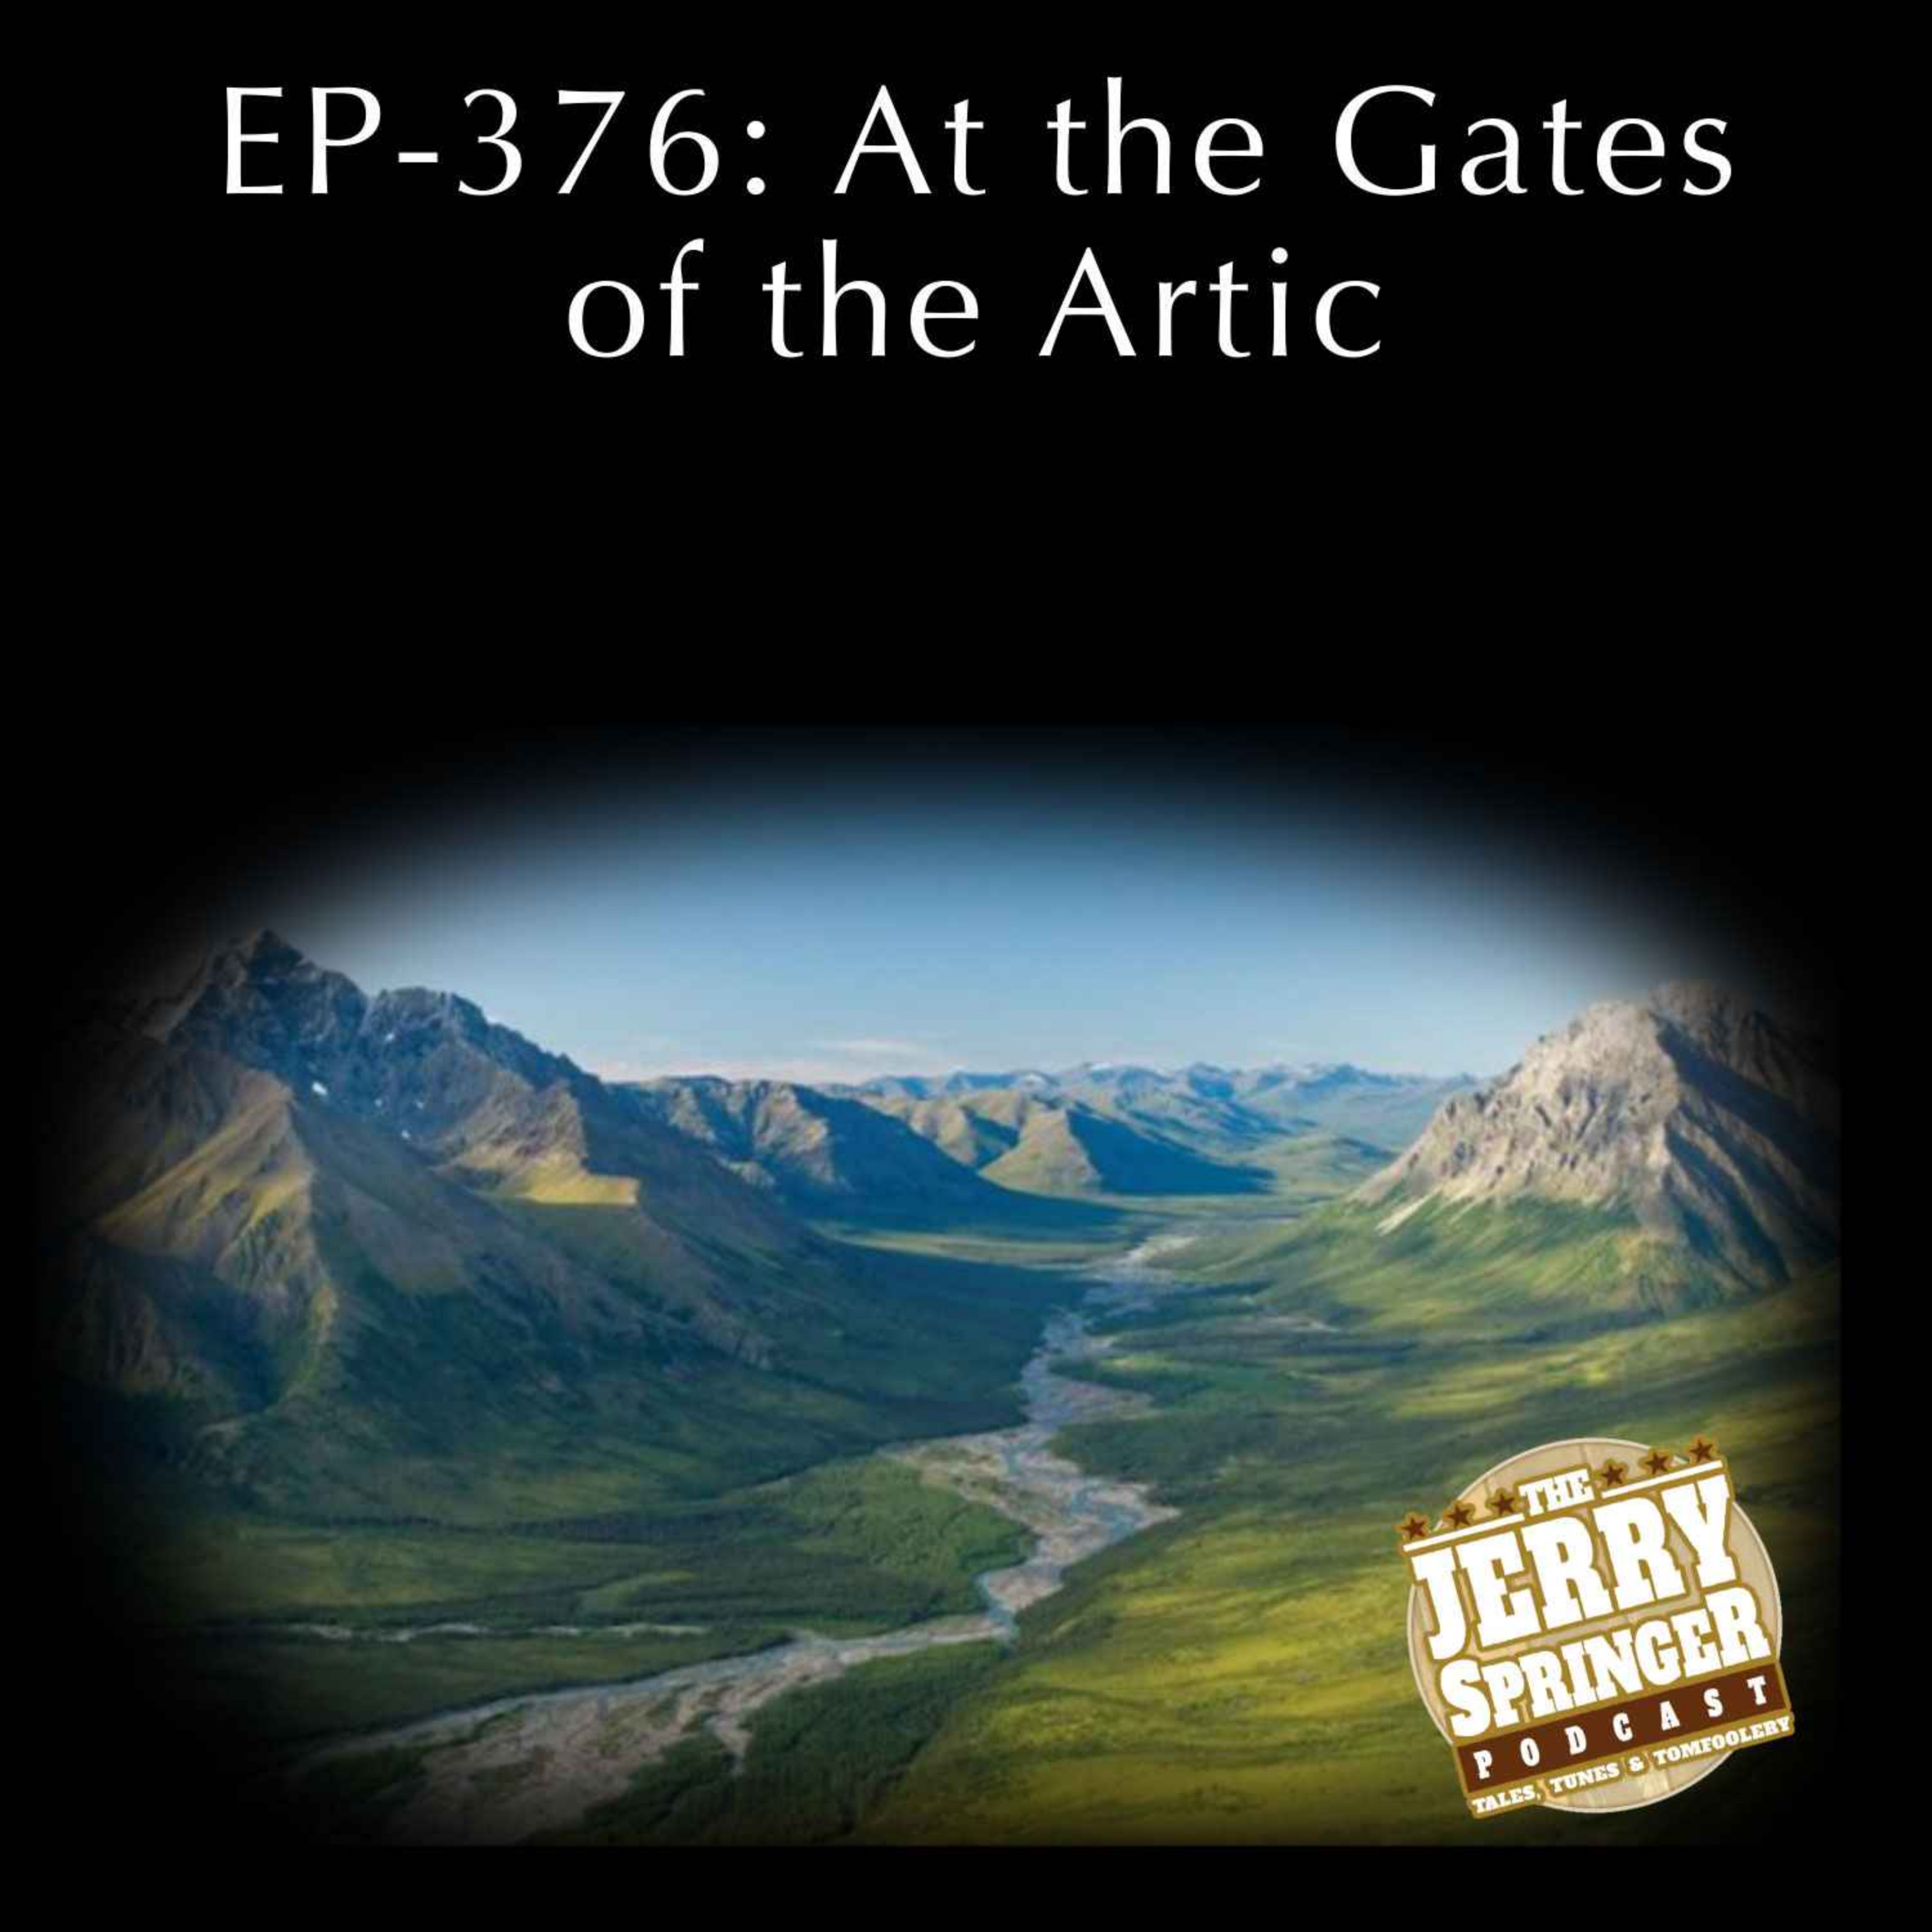 At the Gates of the Artic: EP -376